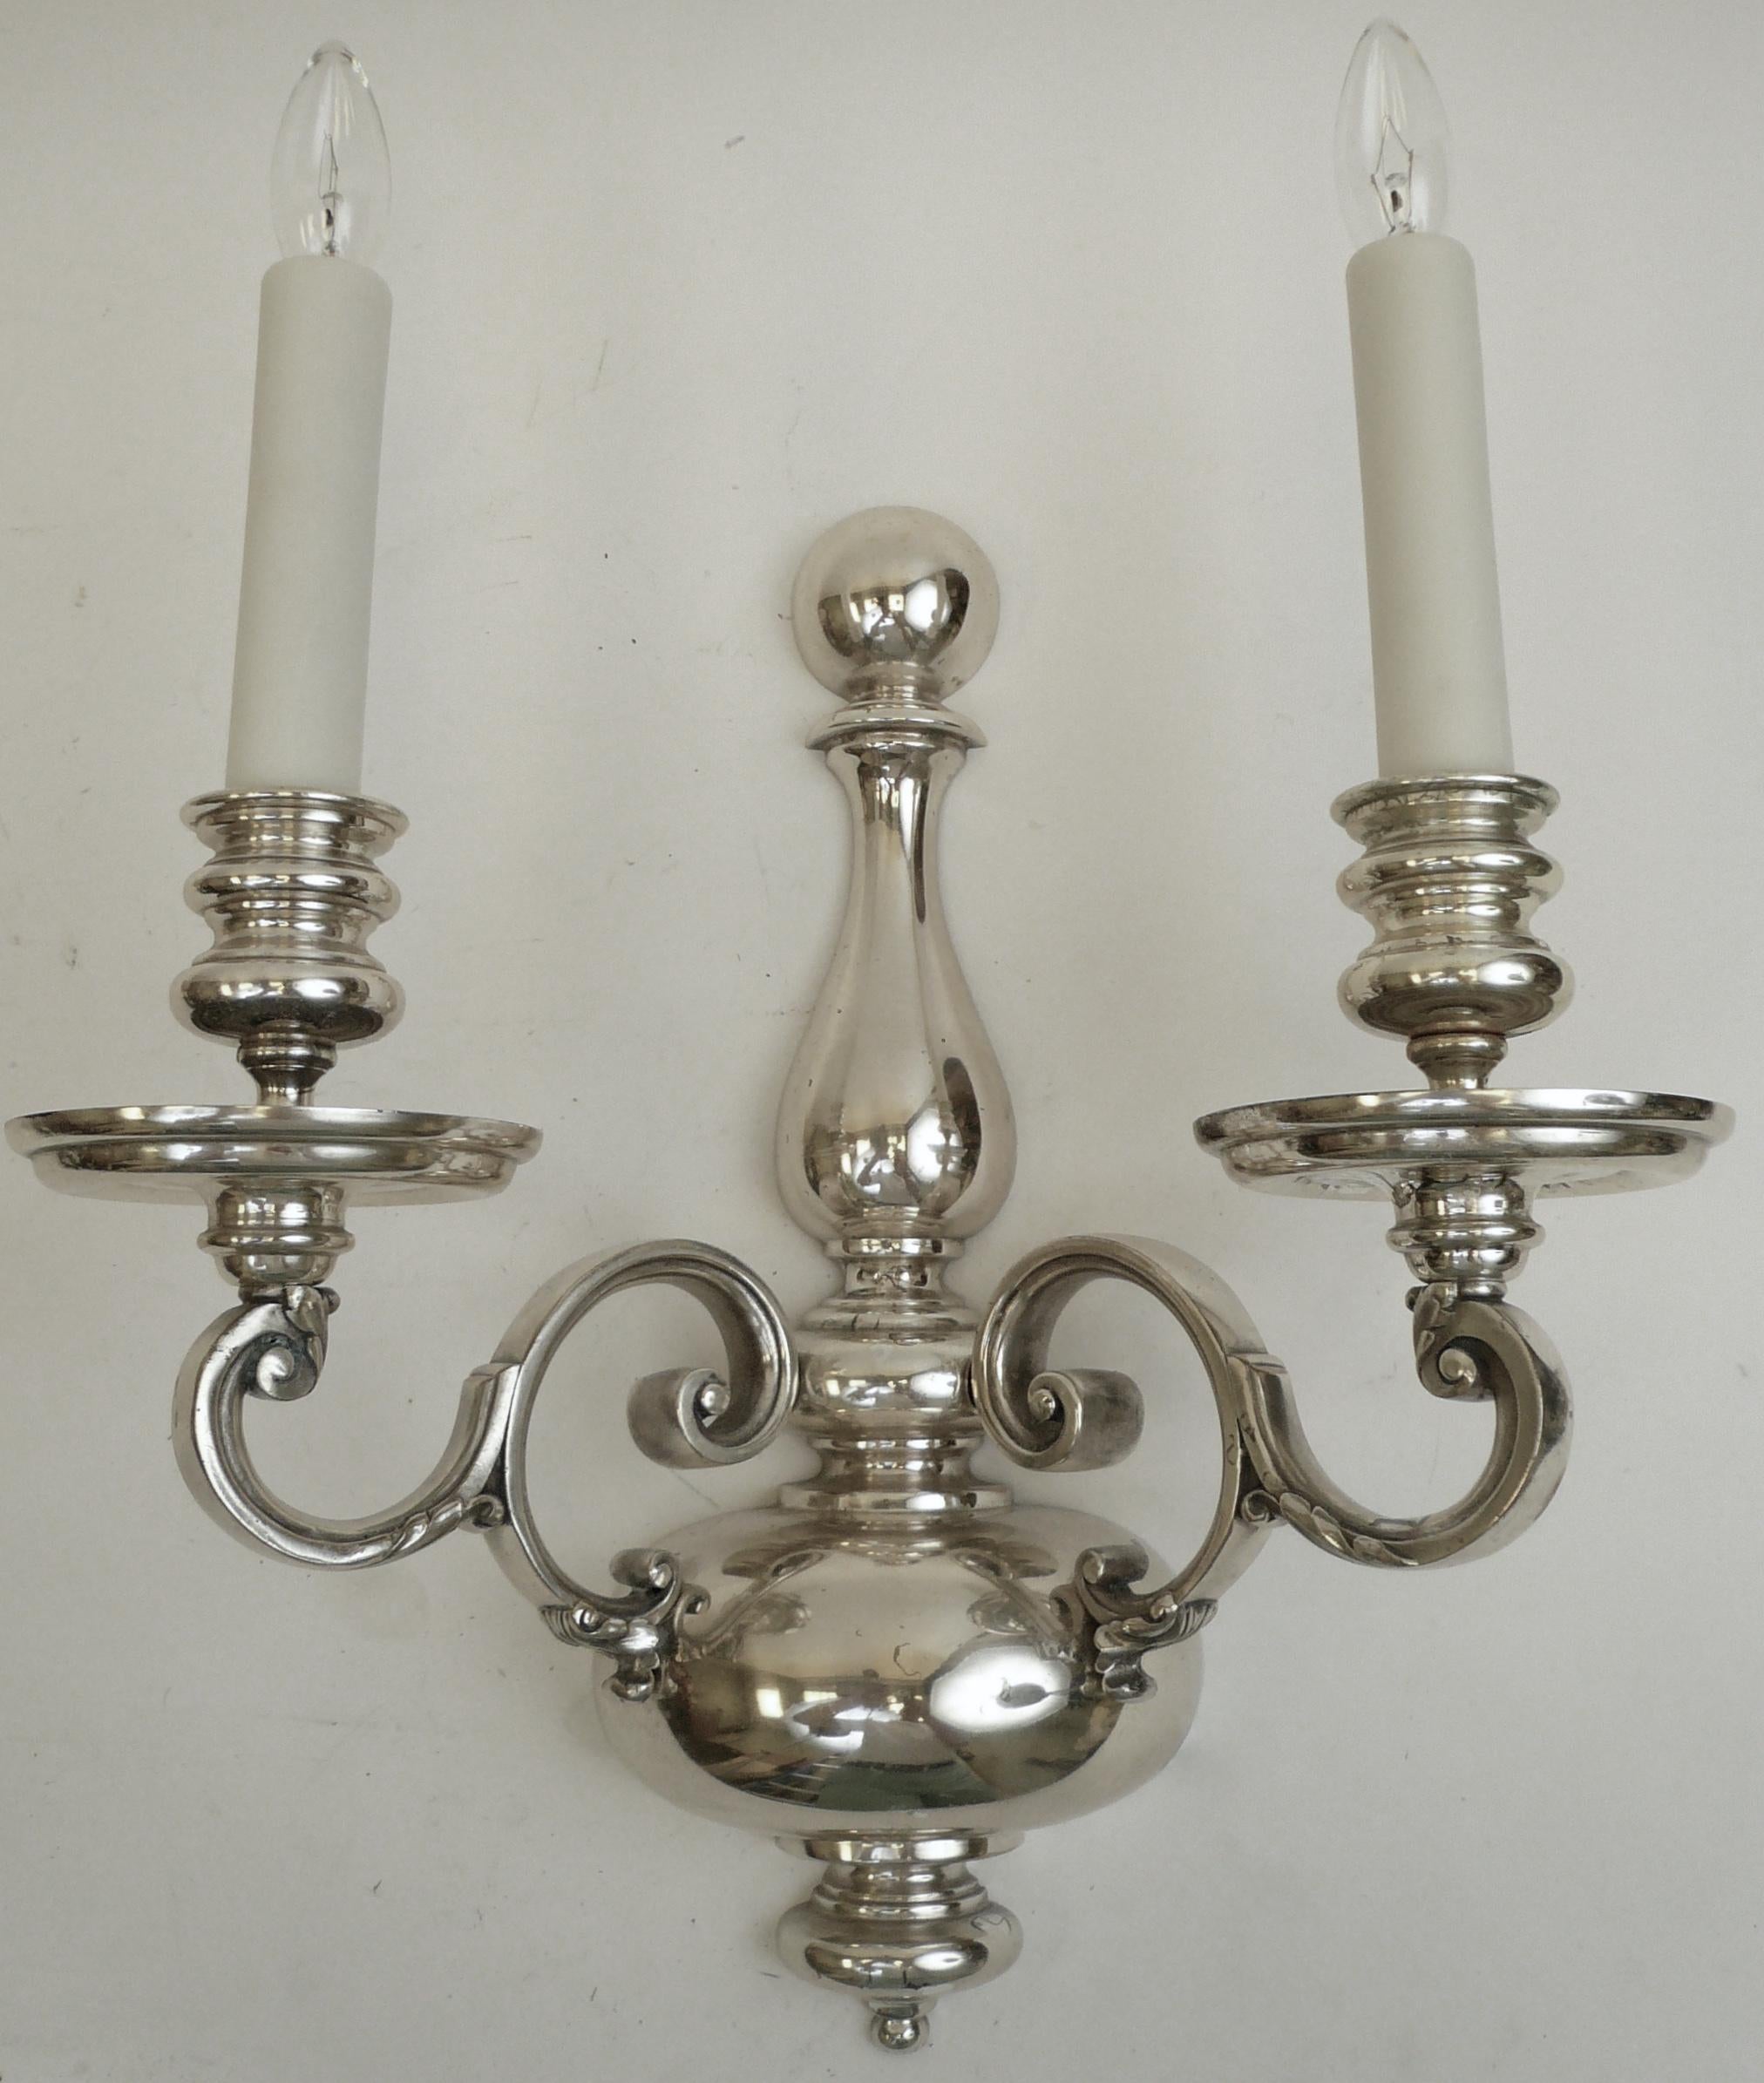 This handsome pair of Caldwell sconces are well proportioned, and beautifully cast.